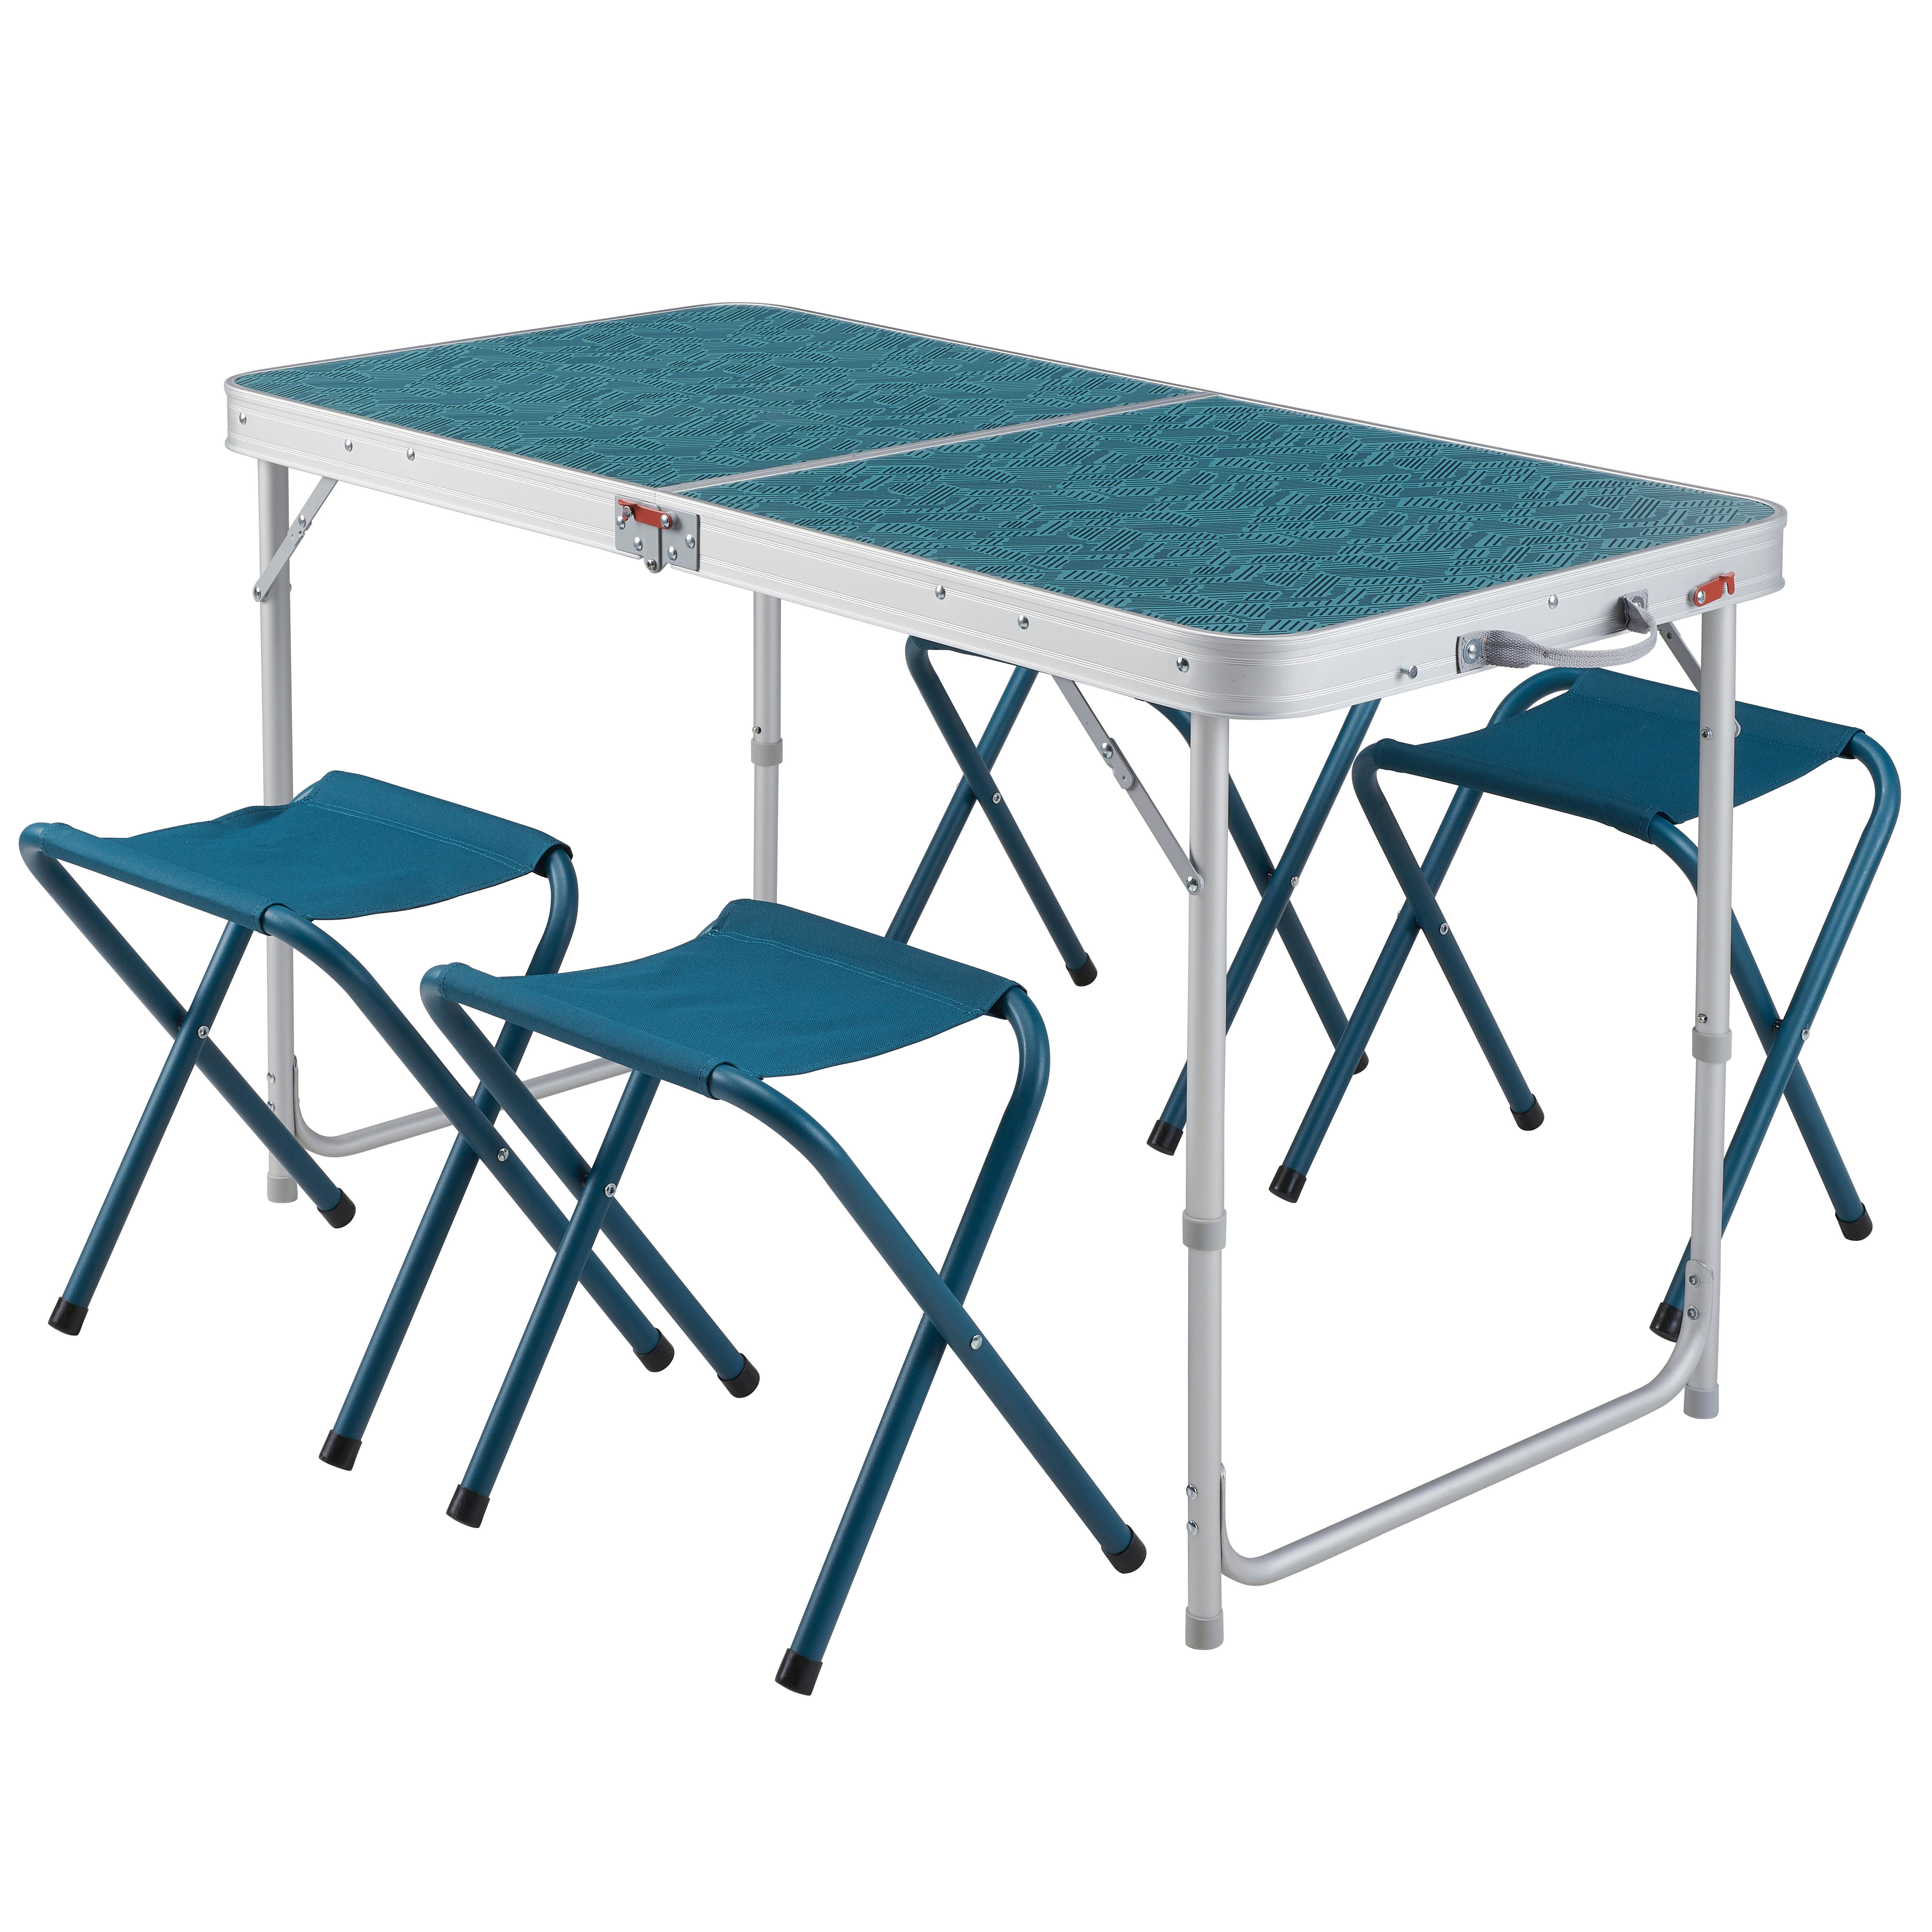 FOLDING CAMPING TABLE - 4 STOOLS - 4 TO 